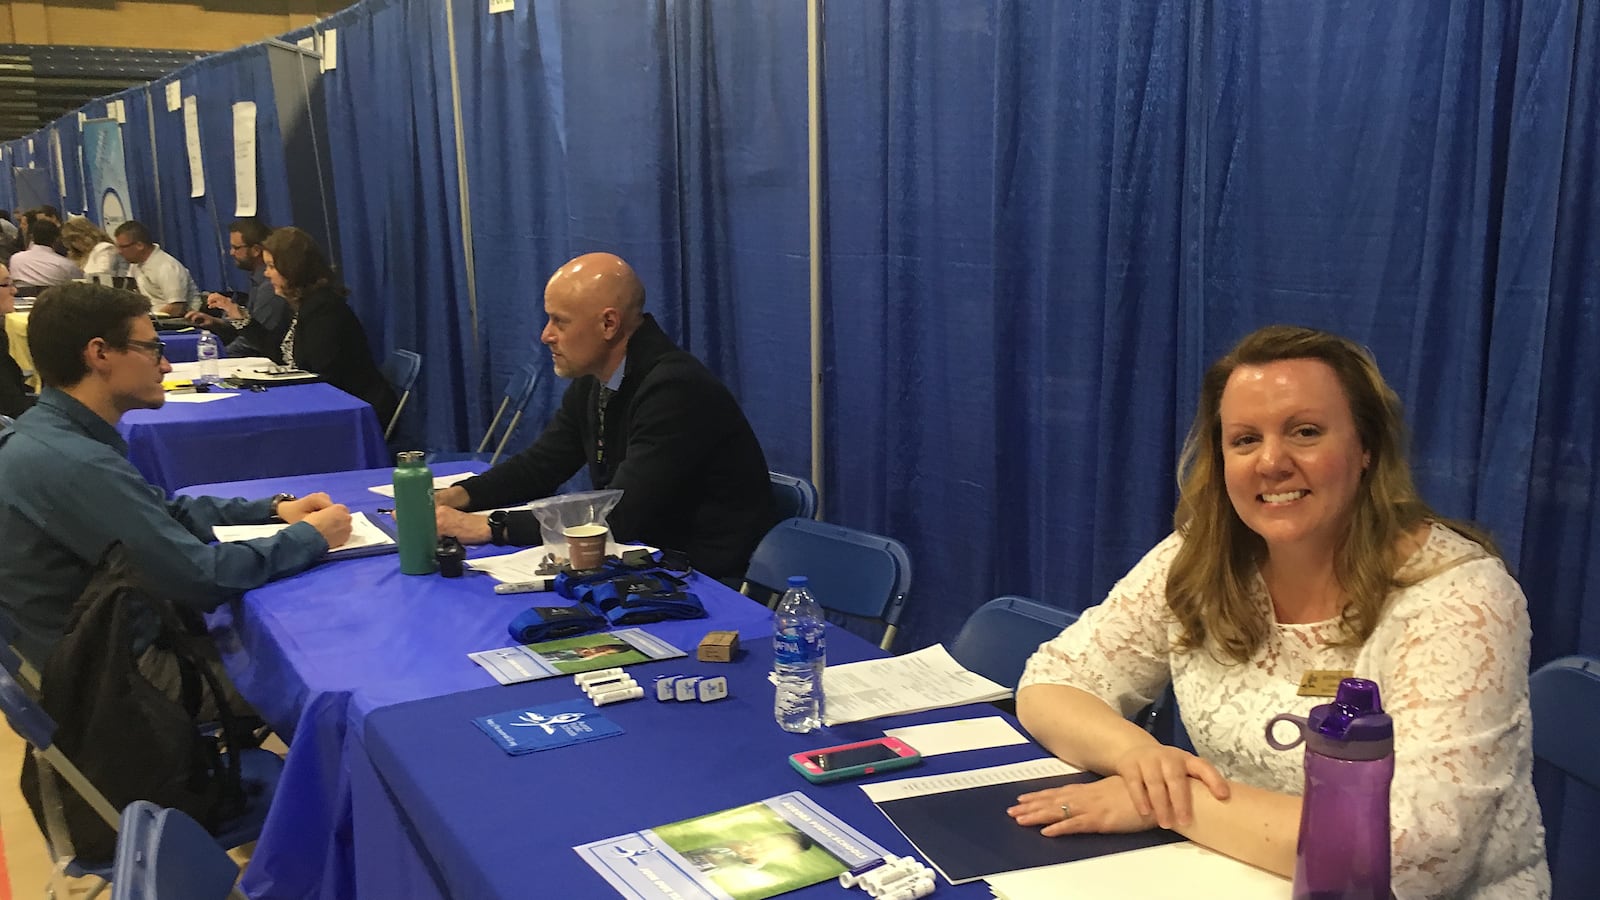 A recruiter from Aurora Public Schools works a booth at a job fair at the University of Northern Colorado.